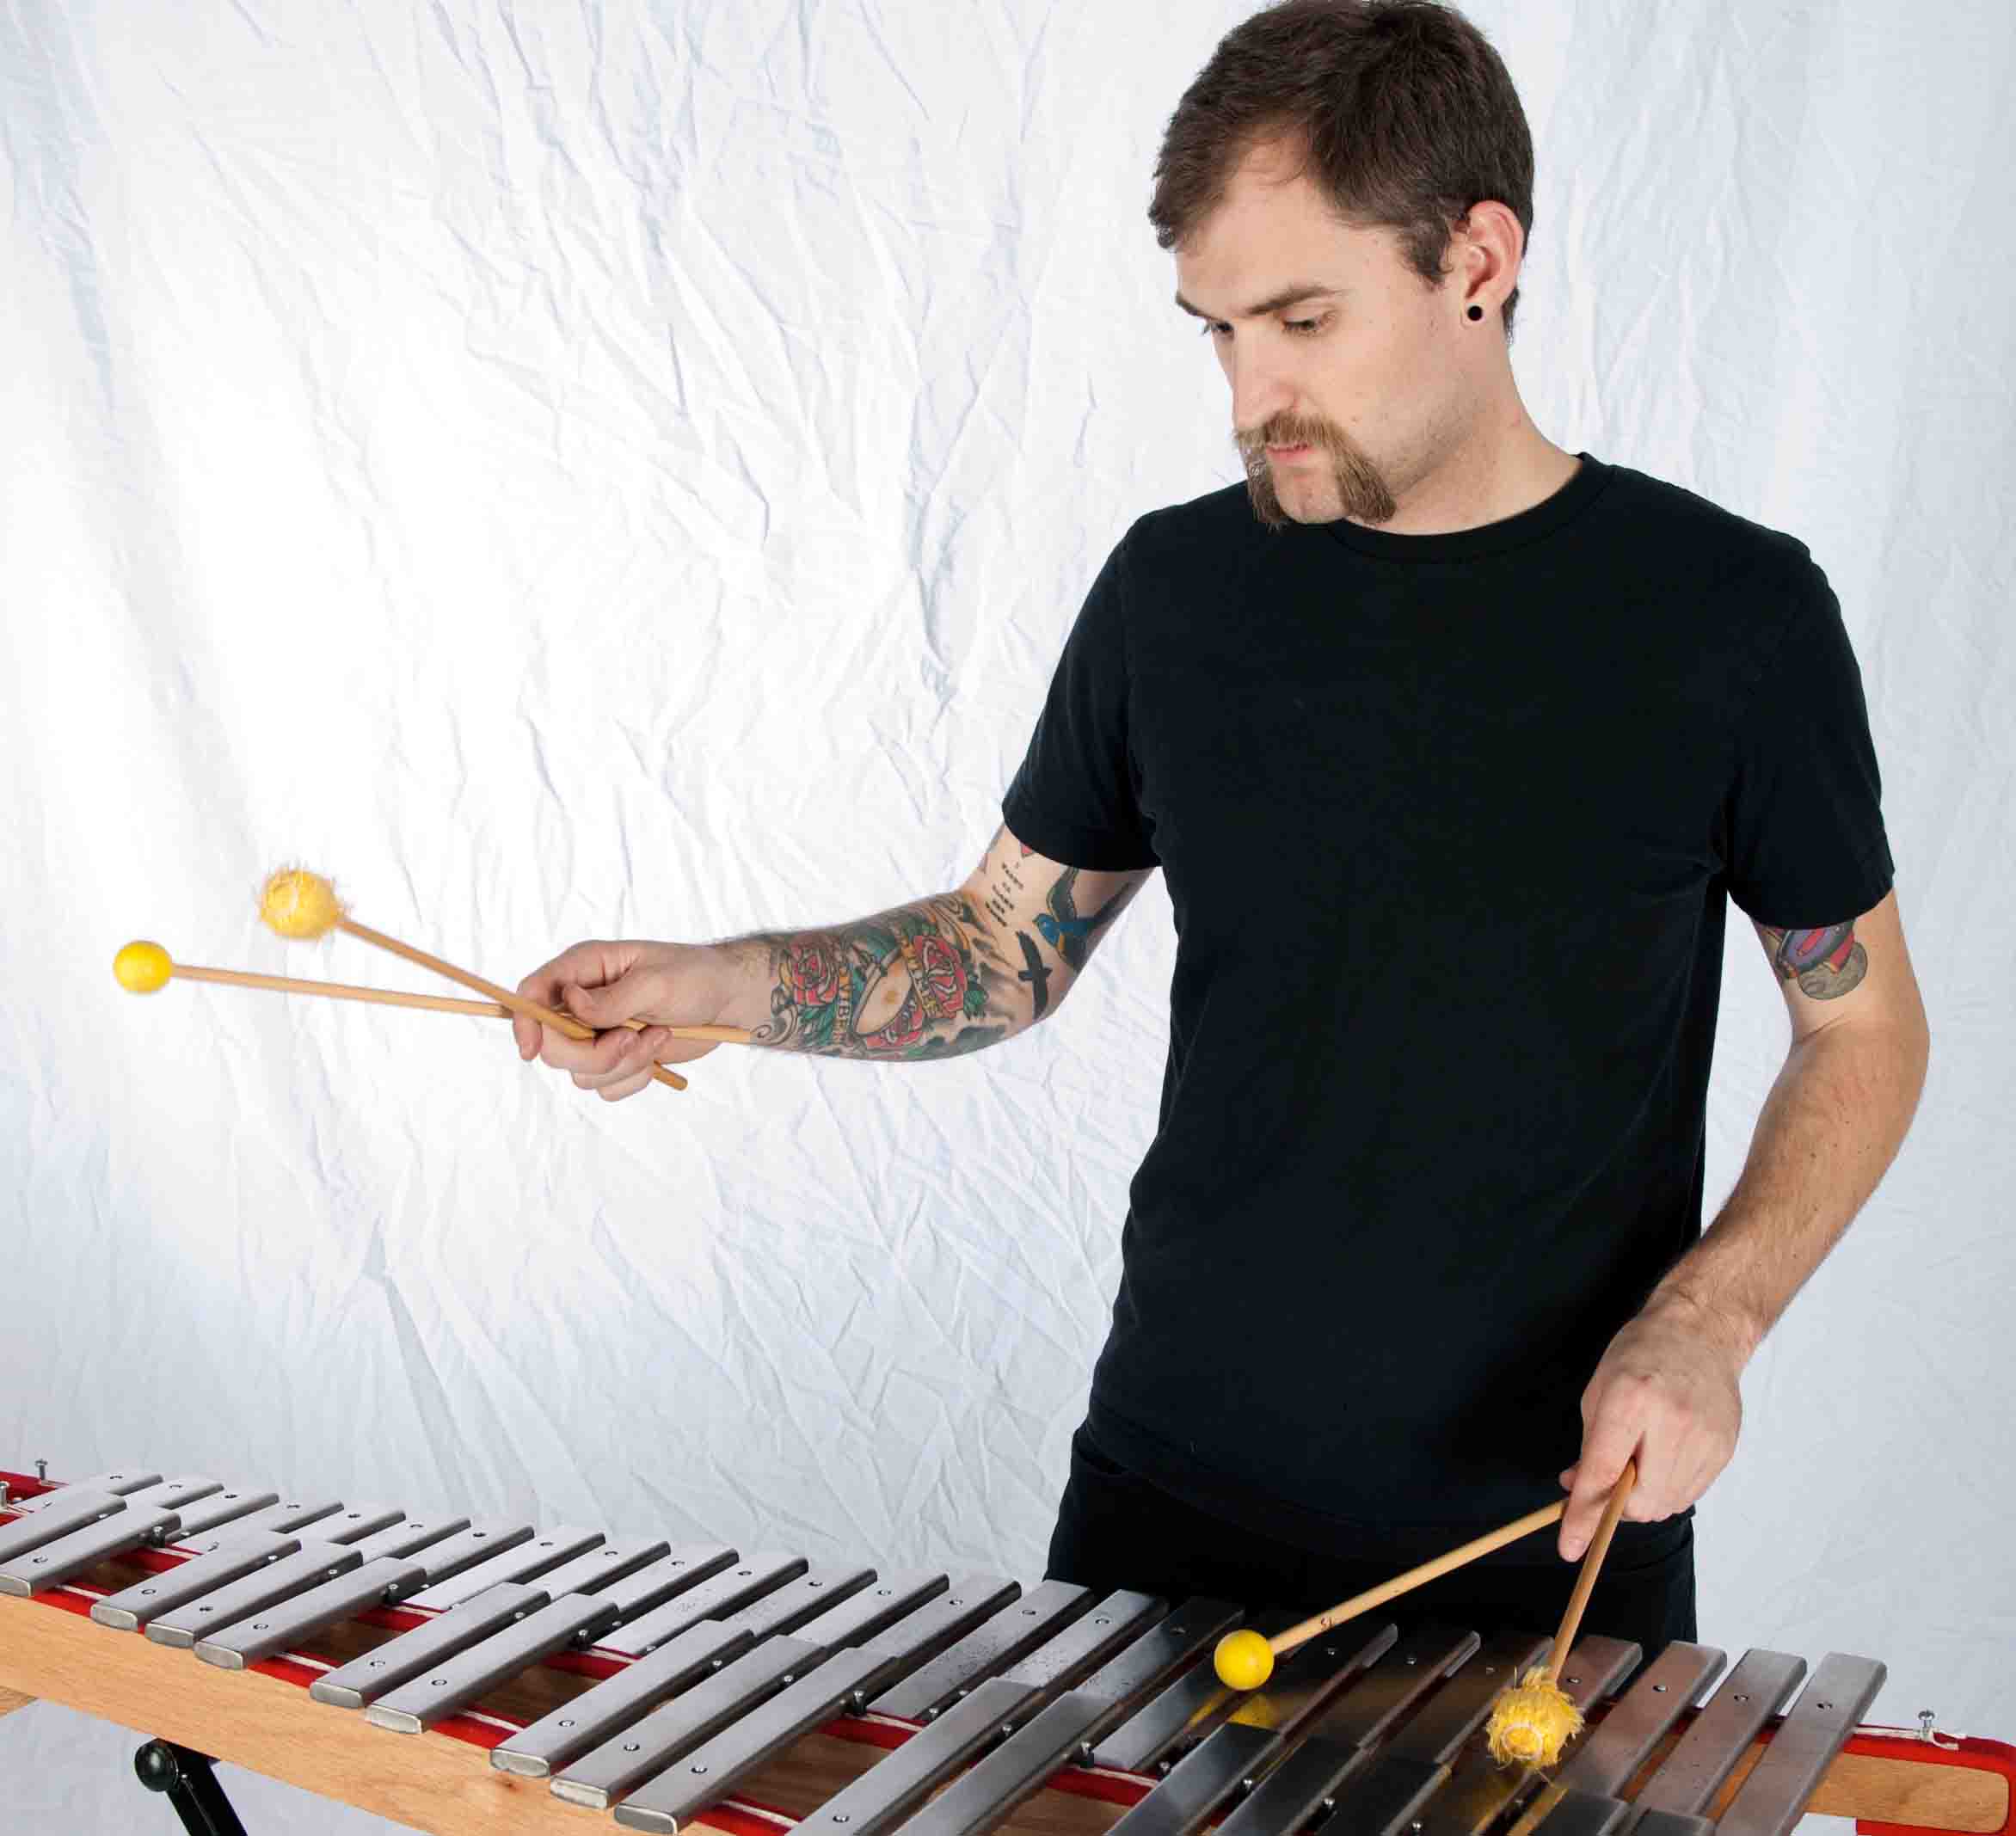 Michael Pisaro, electronic music visiting artist, Concert 1: Trevor Saint (New Haven-based percussionist) performs "Closed Categories in Cartesian Worlds".